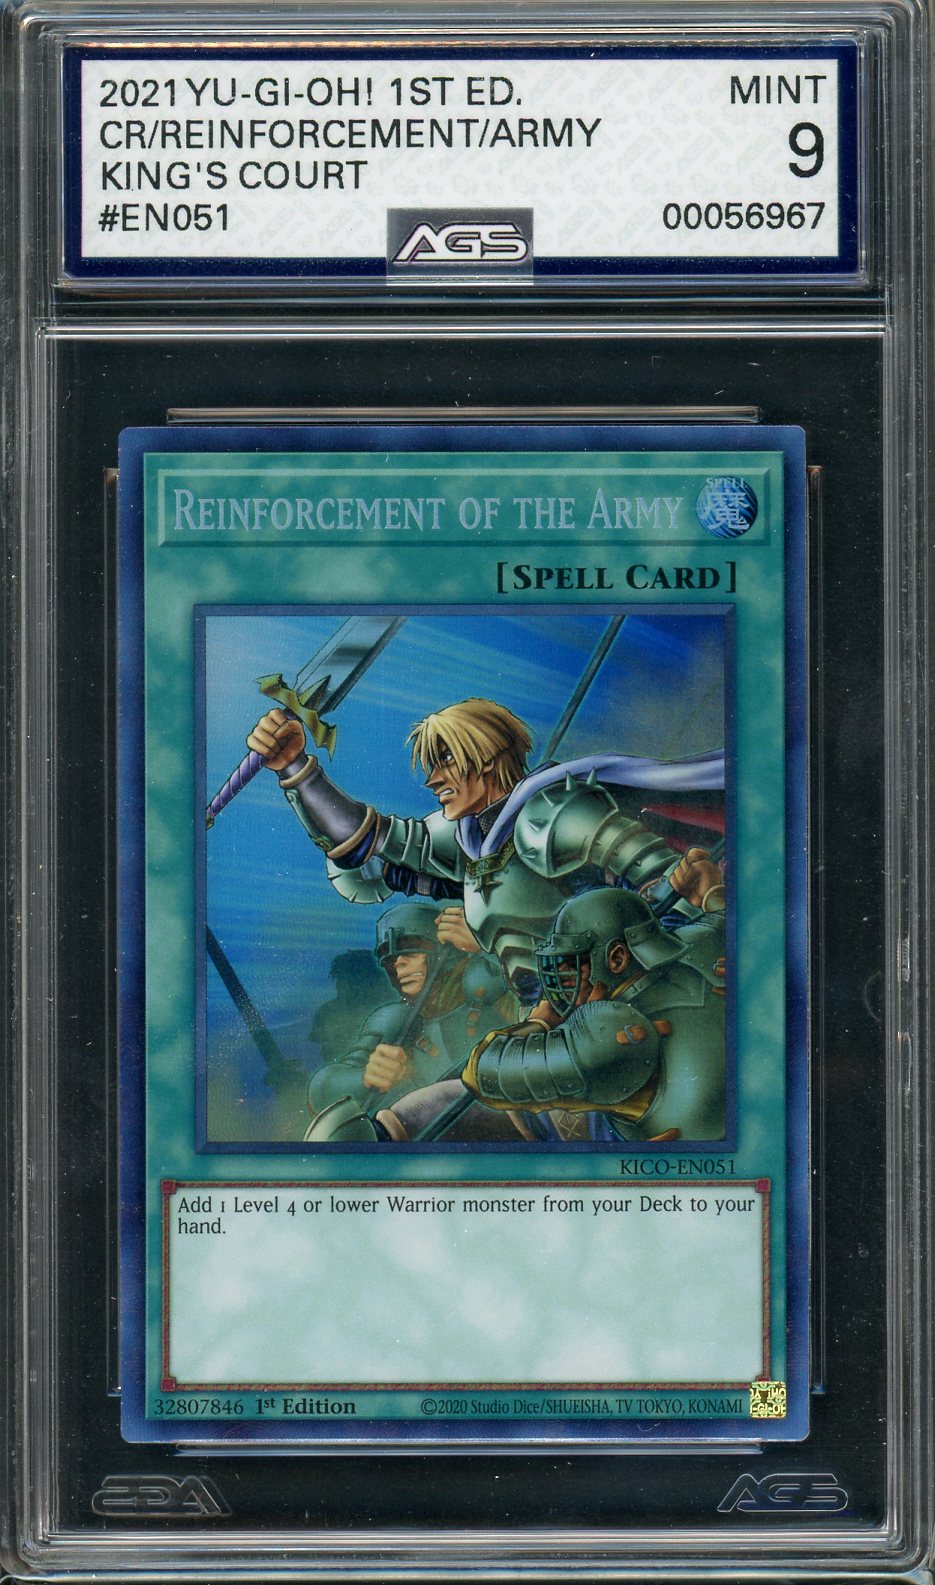 AGS (MINT 9) Reinforcement of the Army #EN051 - King's Court (#00056967)